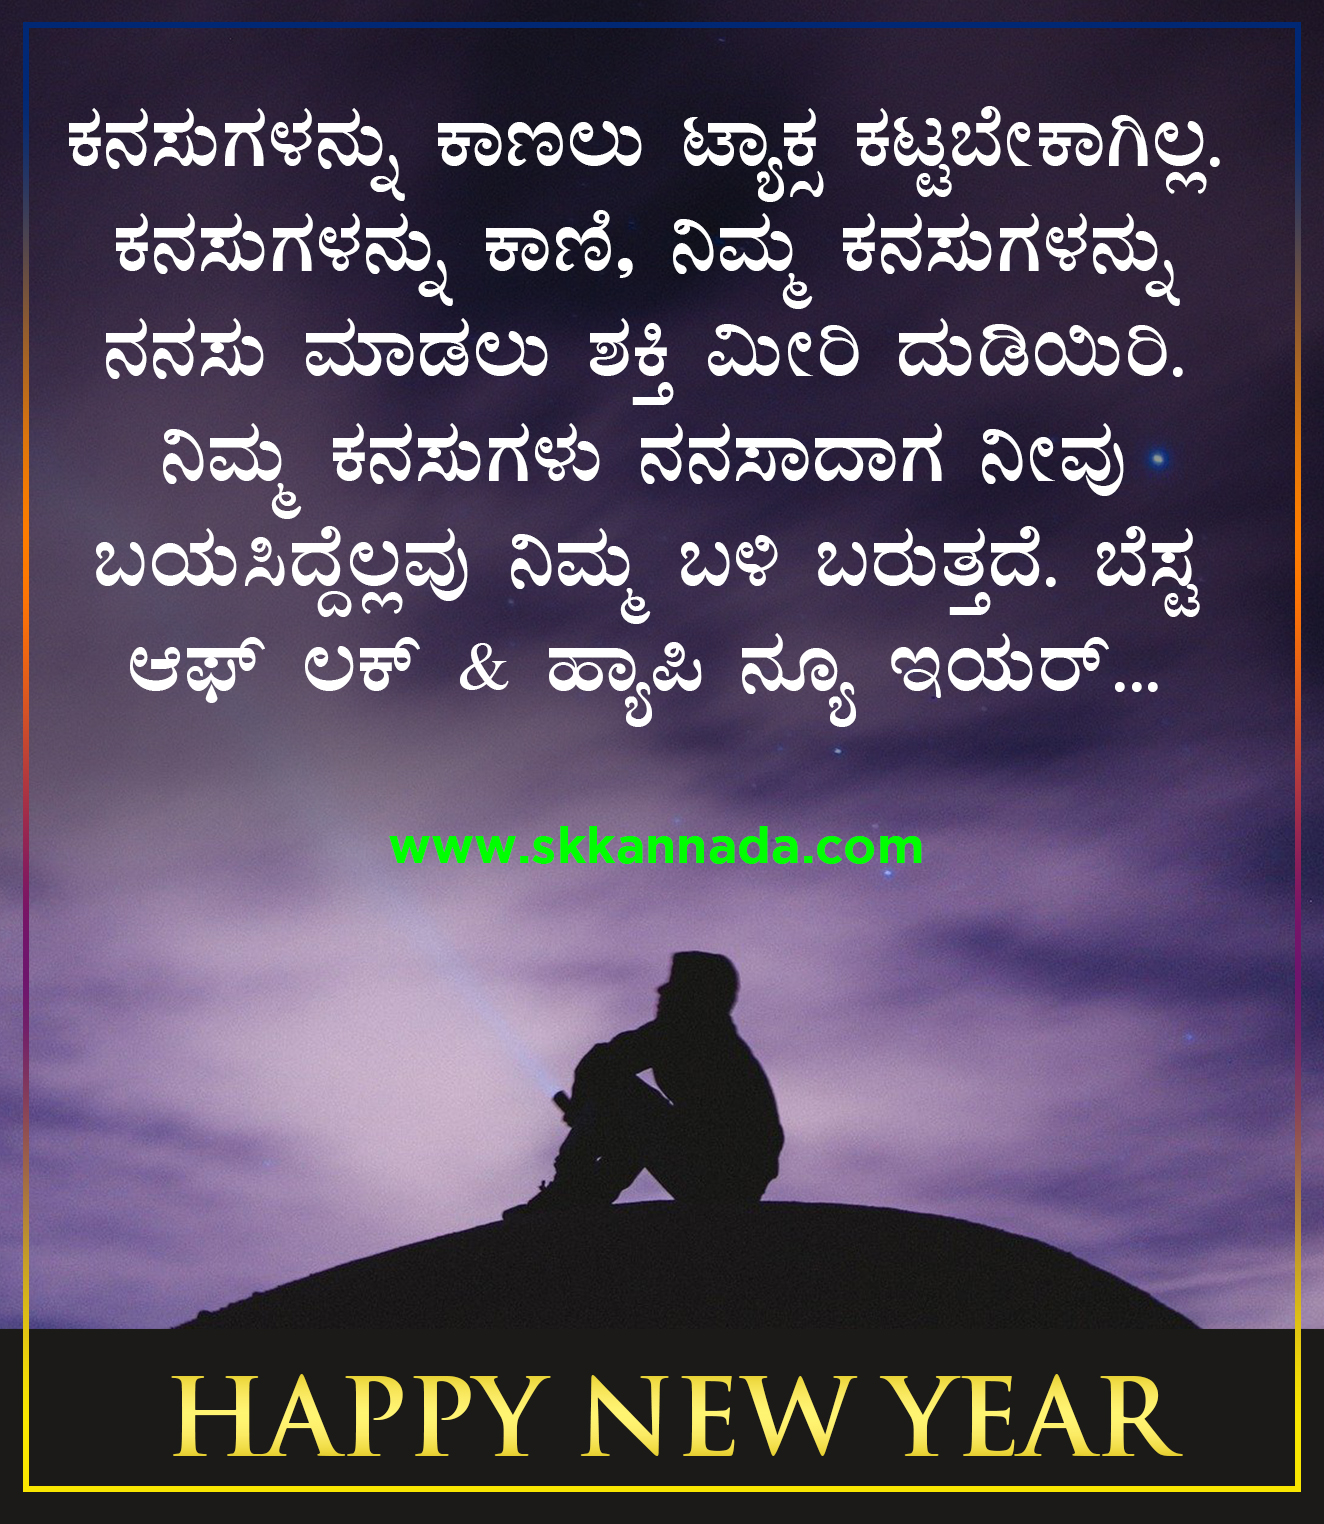 Happy New Year Wishes quotes in Kannada